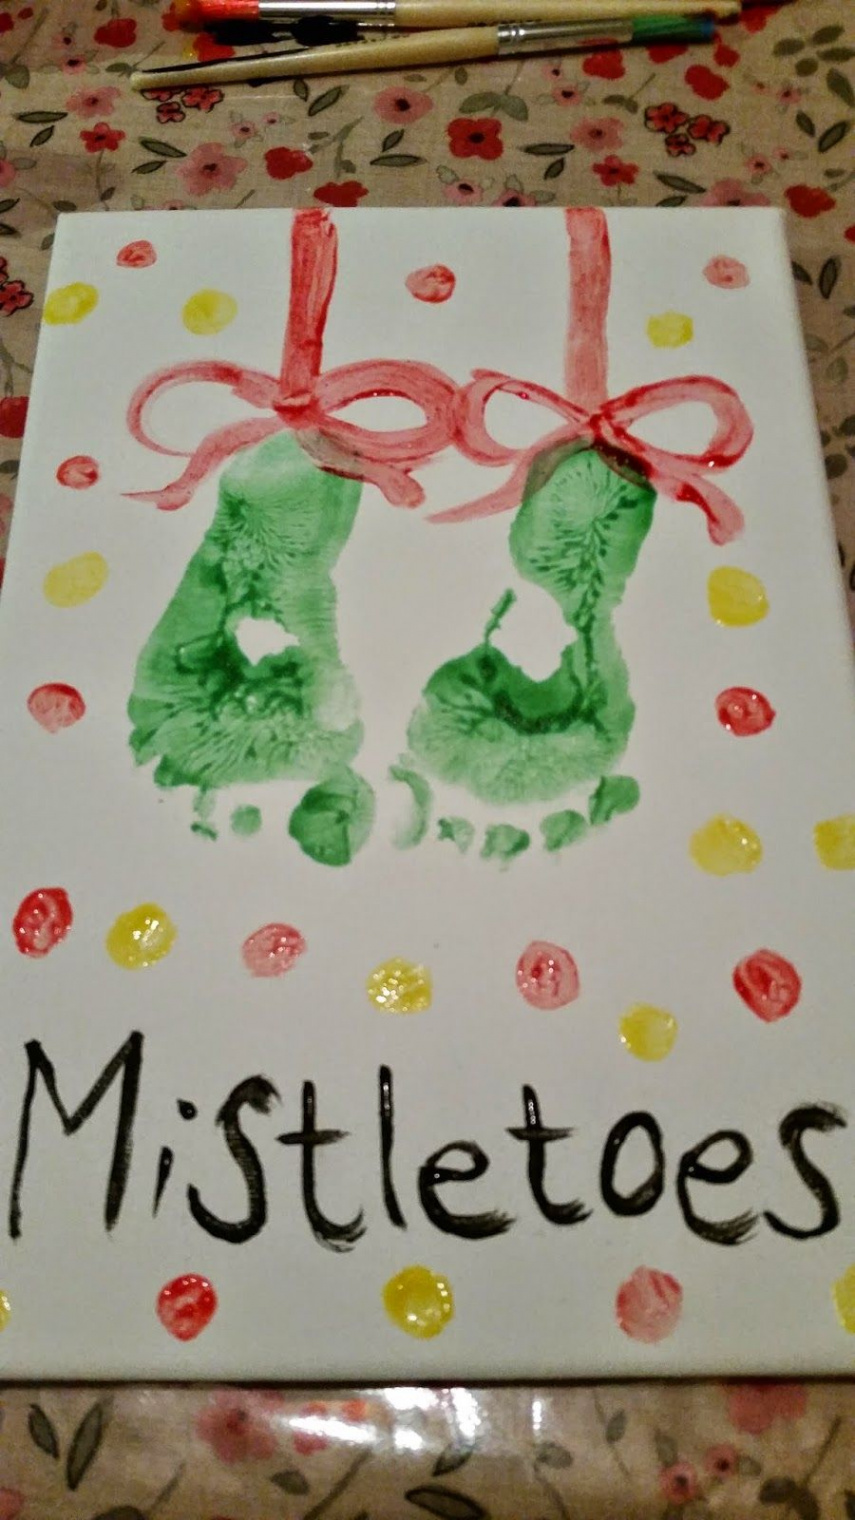 A homemade christmas canvas gift from babies and toddlers